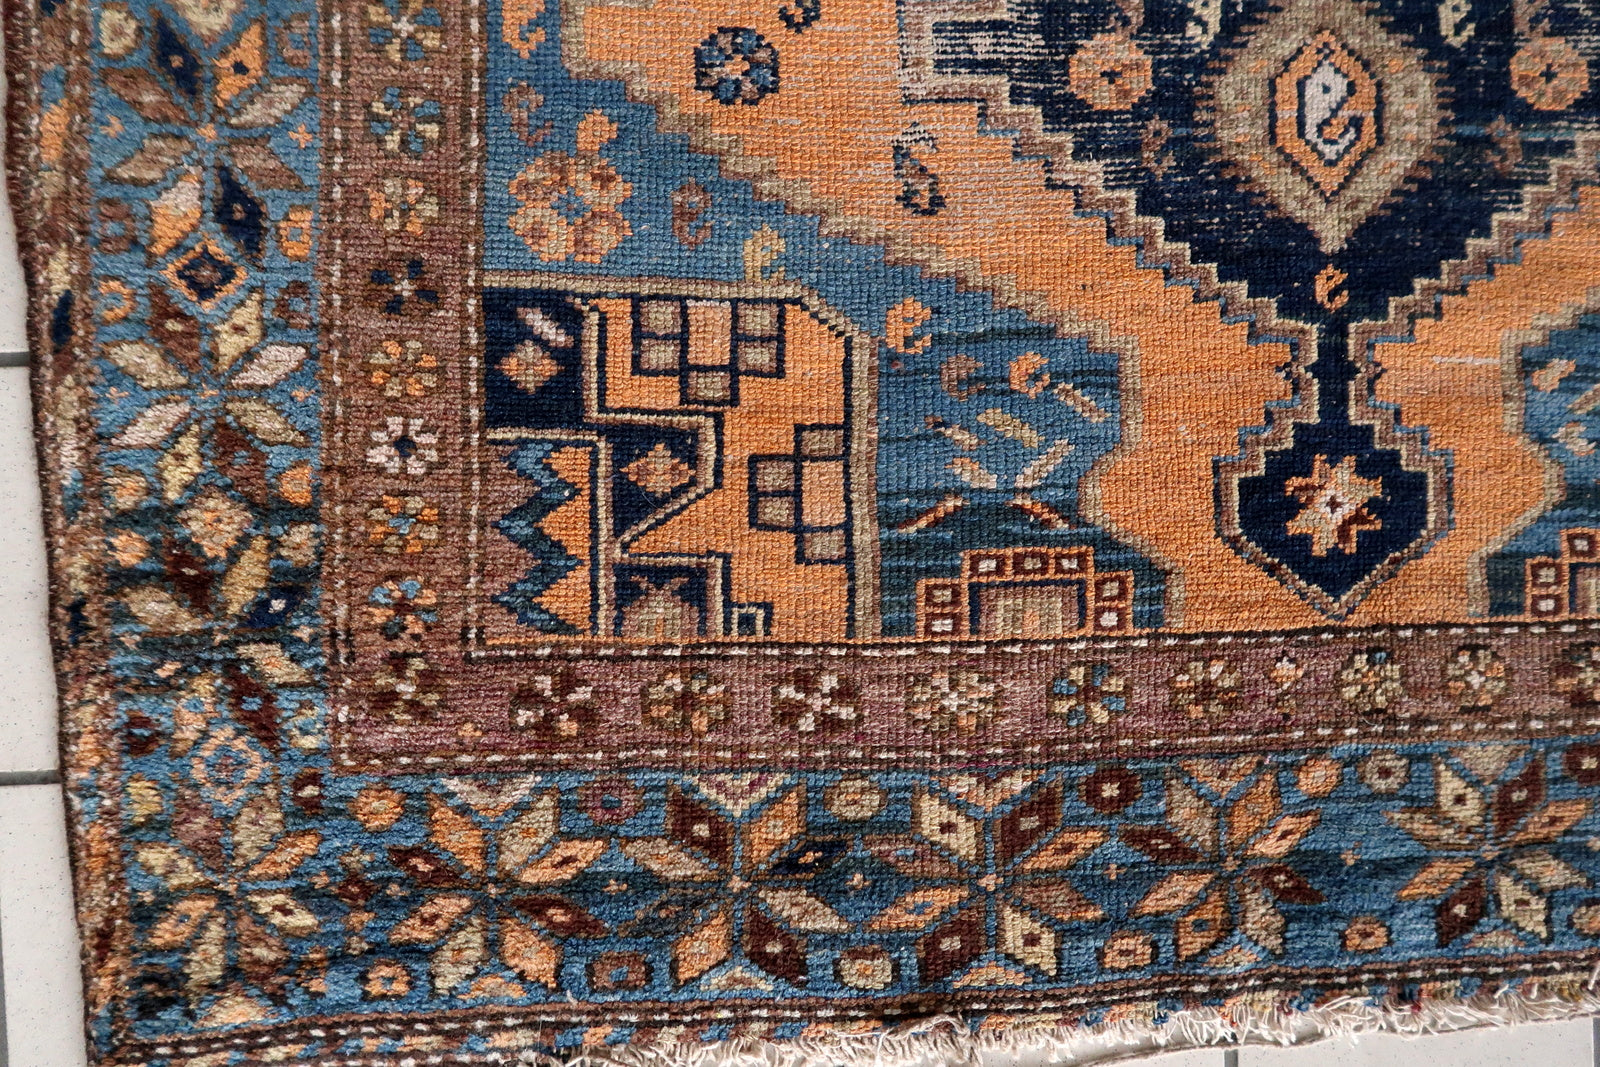 Close-up of intricate design on Handmade Antique Caucasian Shirvan Rug - Detailed view highlighting the geometric motifs and traditional symbols.